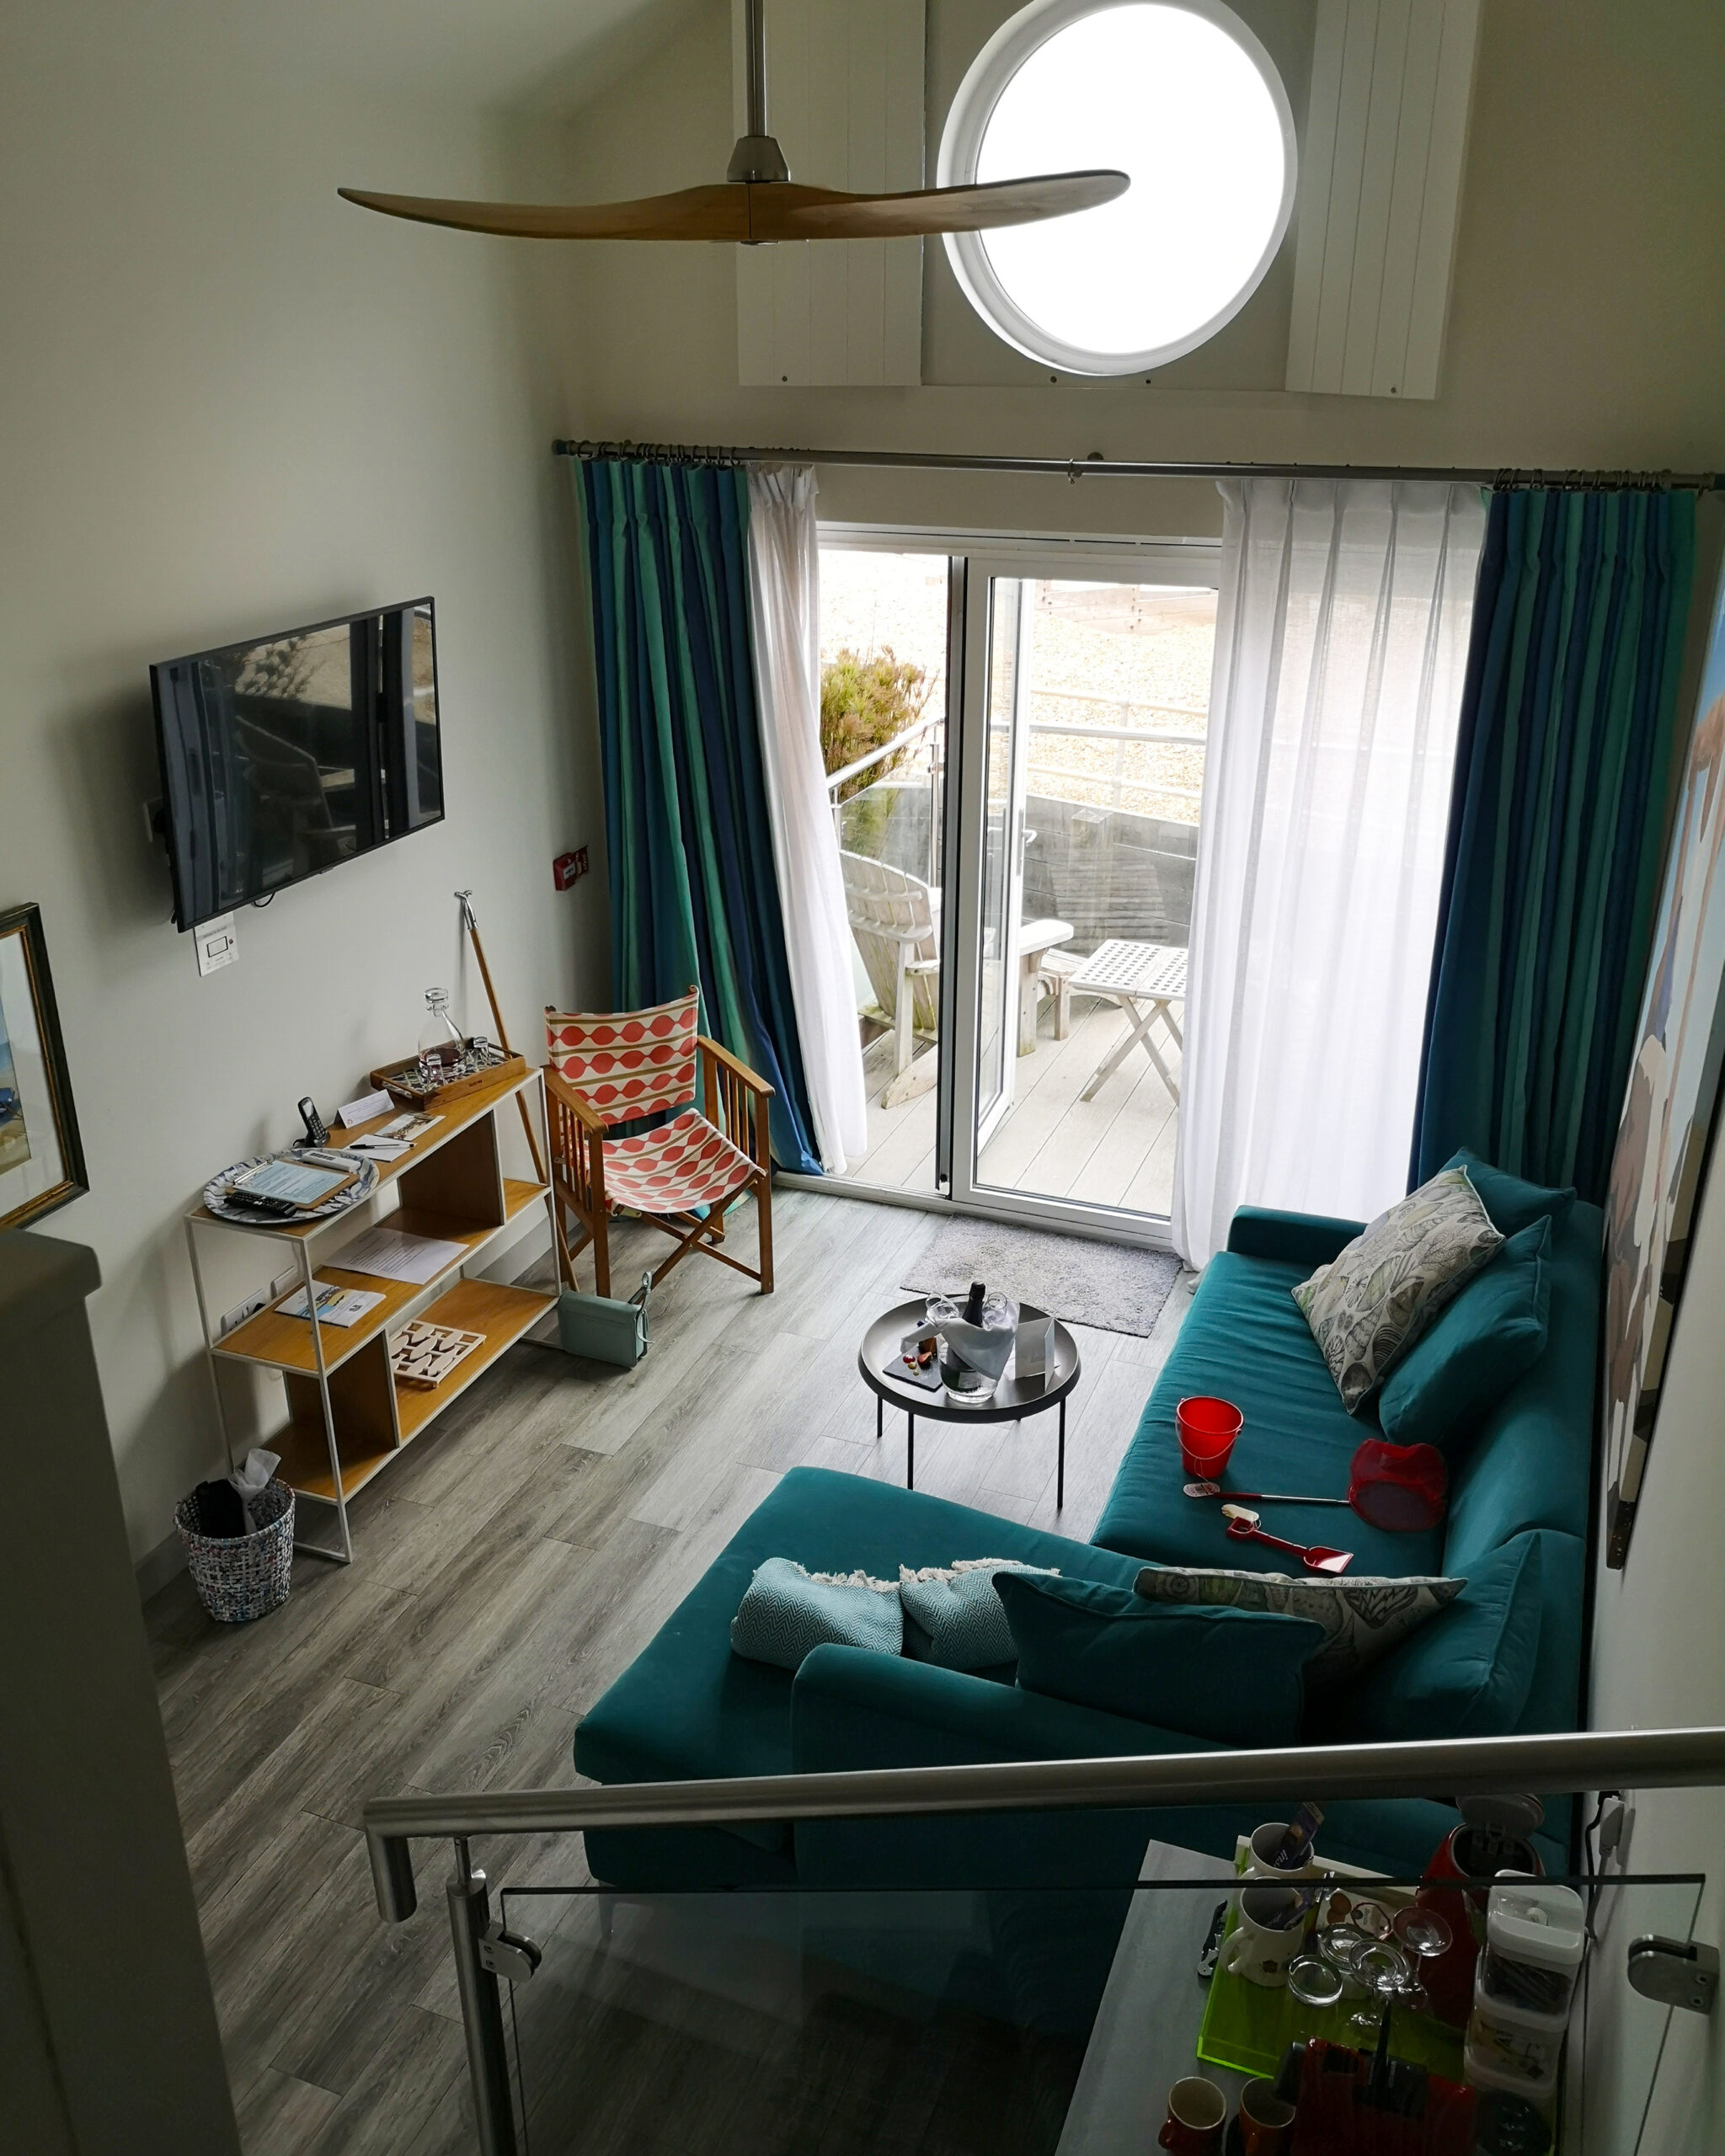 Overnight Stay At The Beachcroft Beach Hut Suites, Beachcroft Beach Hut Suites, Seaside Break, Beachcroft Hotel, Huts, Seaside Staycation, Family Staycation, Family-friendly, seaside Break, Frenchie Xmas Giveaways, Win, Competition, the Frenchie Mummy, Sussex, West Sussex